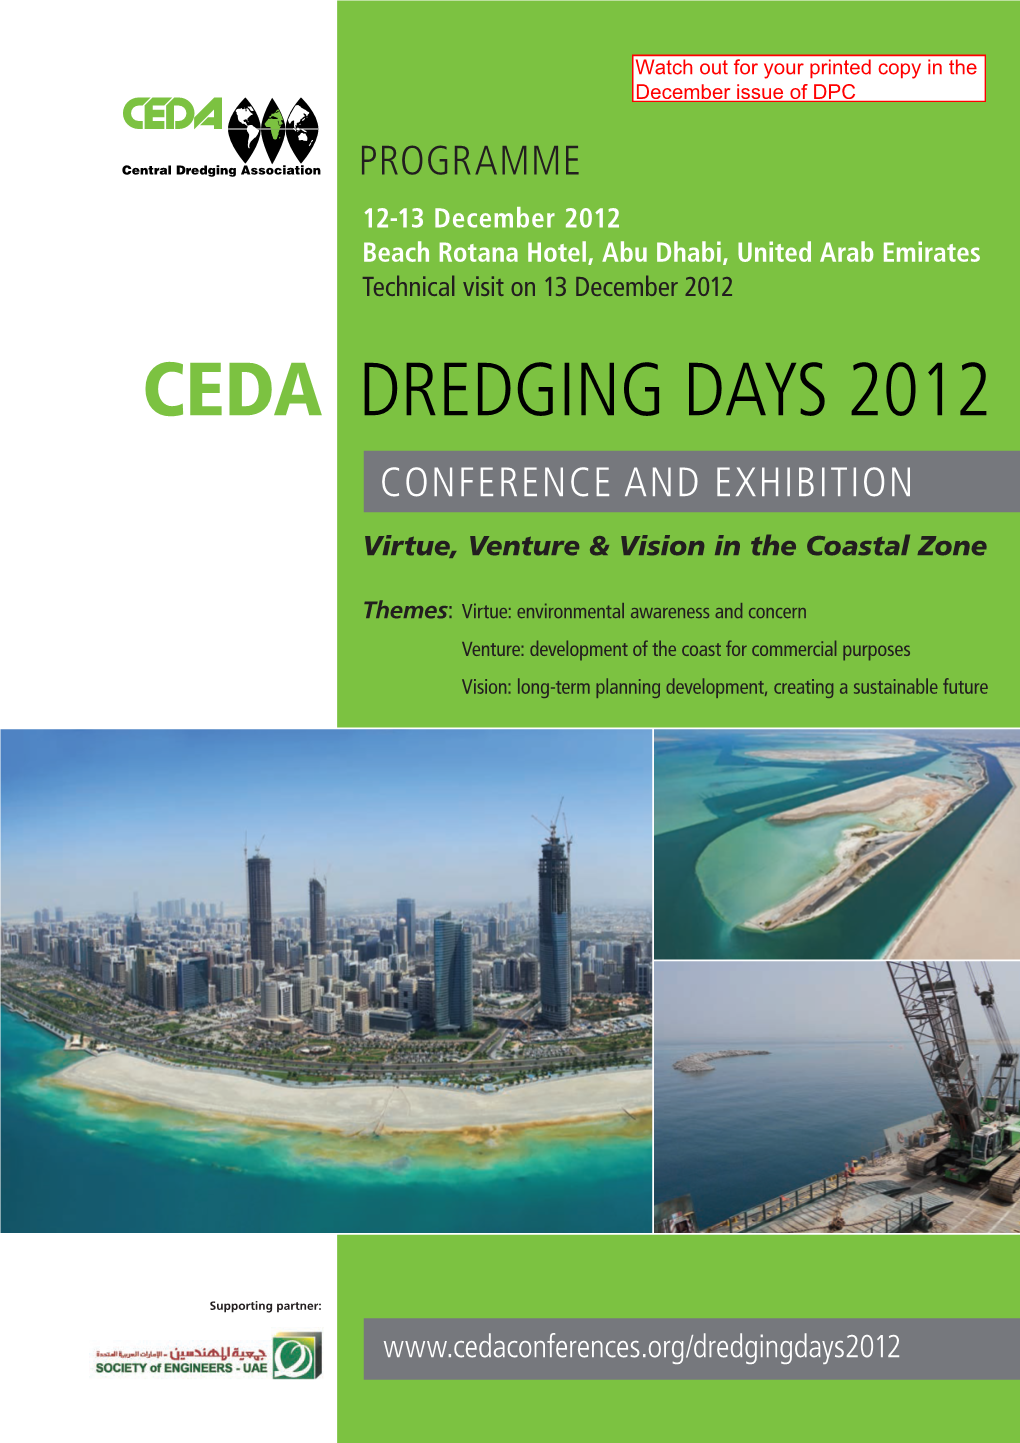 CEDA Dredging Days 2012 Programme Is Published by IHS Fairplay Ltd., Sentinel House, 163 Brighton Road, Design Coulsdon, Surrey CR5 2YH, United Kingdom